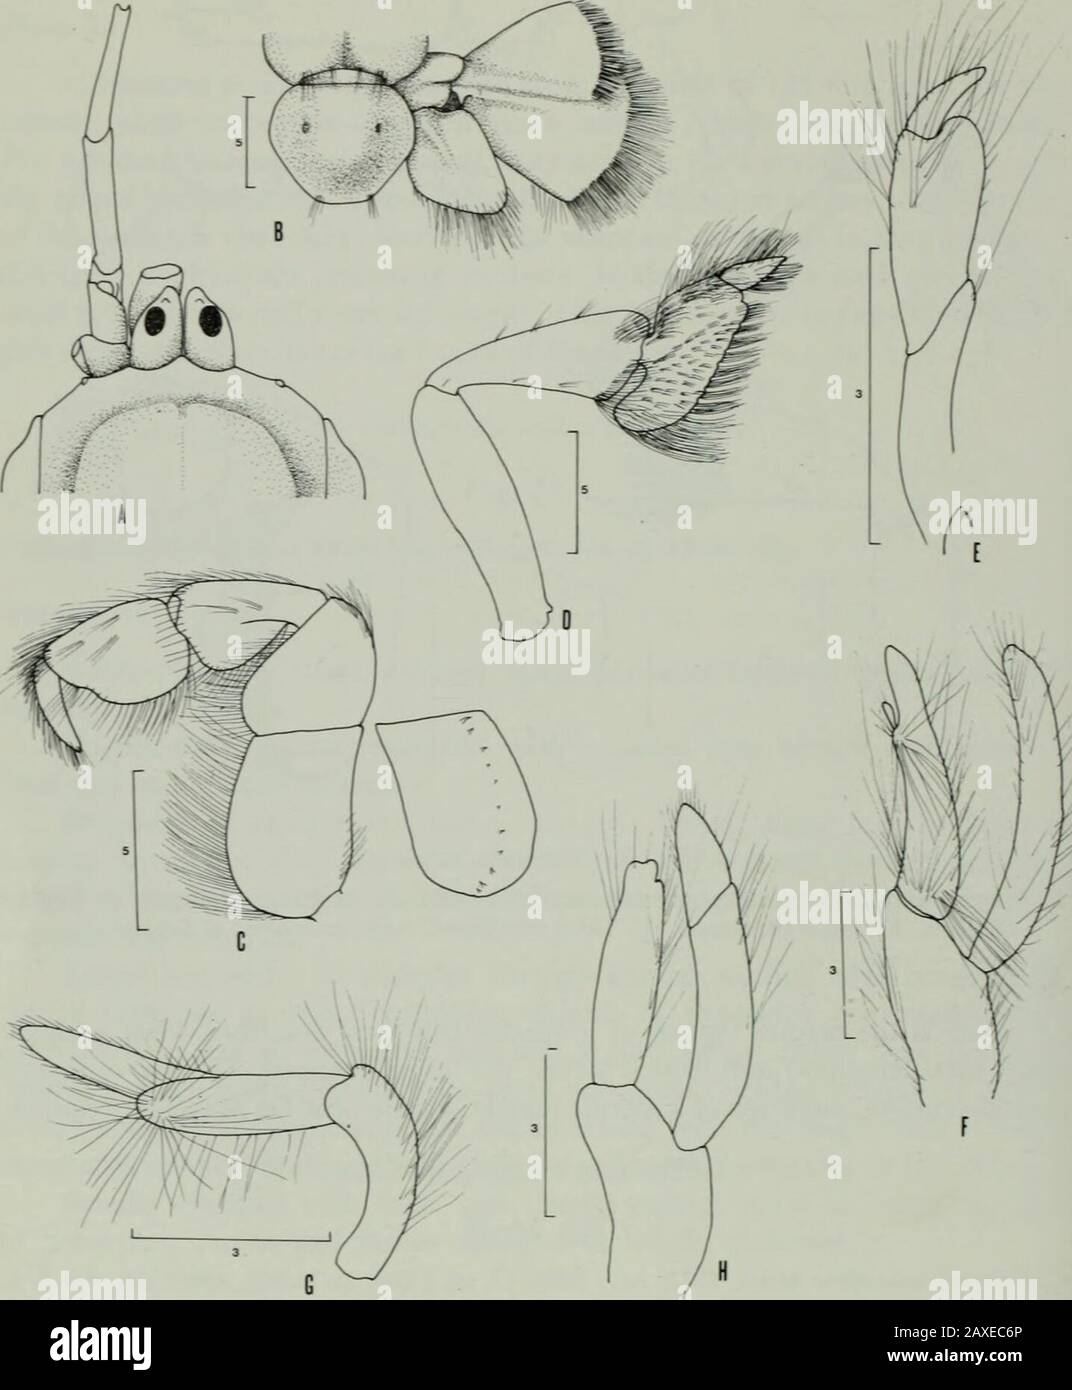 Annals of the South African MuseumAnnale van die Suid-Afrikaanse Museum . Fig. 2. Callianassa indica $ A. Anterior carapace, eyestalks, and antennae in dorsal view. B. Larger cheliped. C. Smallercheliped. D. Third pereiopod. E. Third maxilliped, with inner view of ischium. Remarks This is the second record of a species that was described from a singlemale, total length 90 mm, which lacked the larger cheliped. The above figuresand description, although of a mature female, supplement De Mans description. Callianassa mauritiana MiersFig. 3A-H Callianassa mauritiana Miers, 1882: 341; 1884: 15, pi. Stock Photo